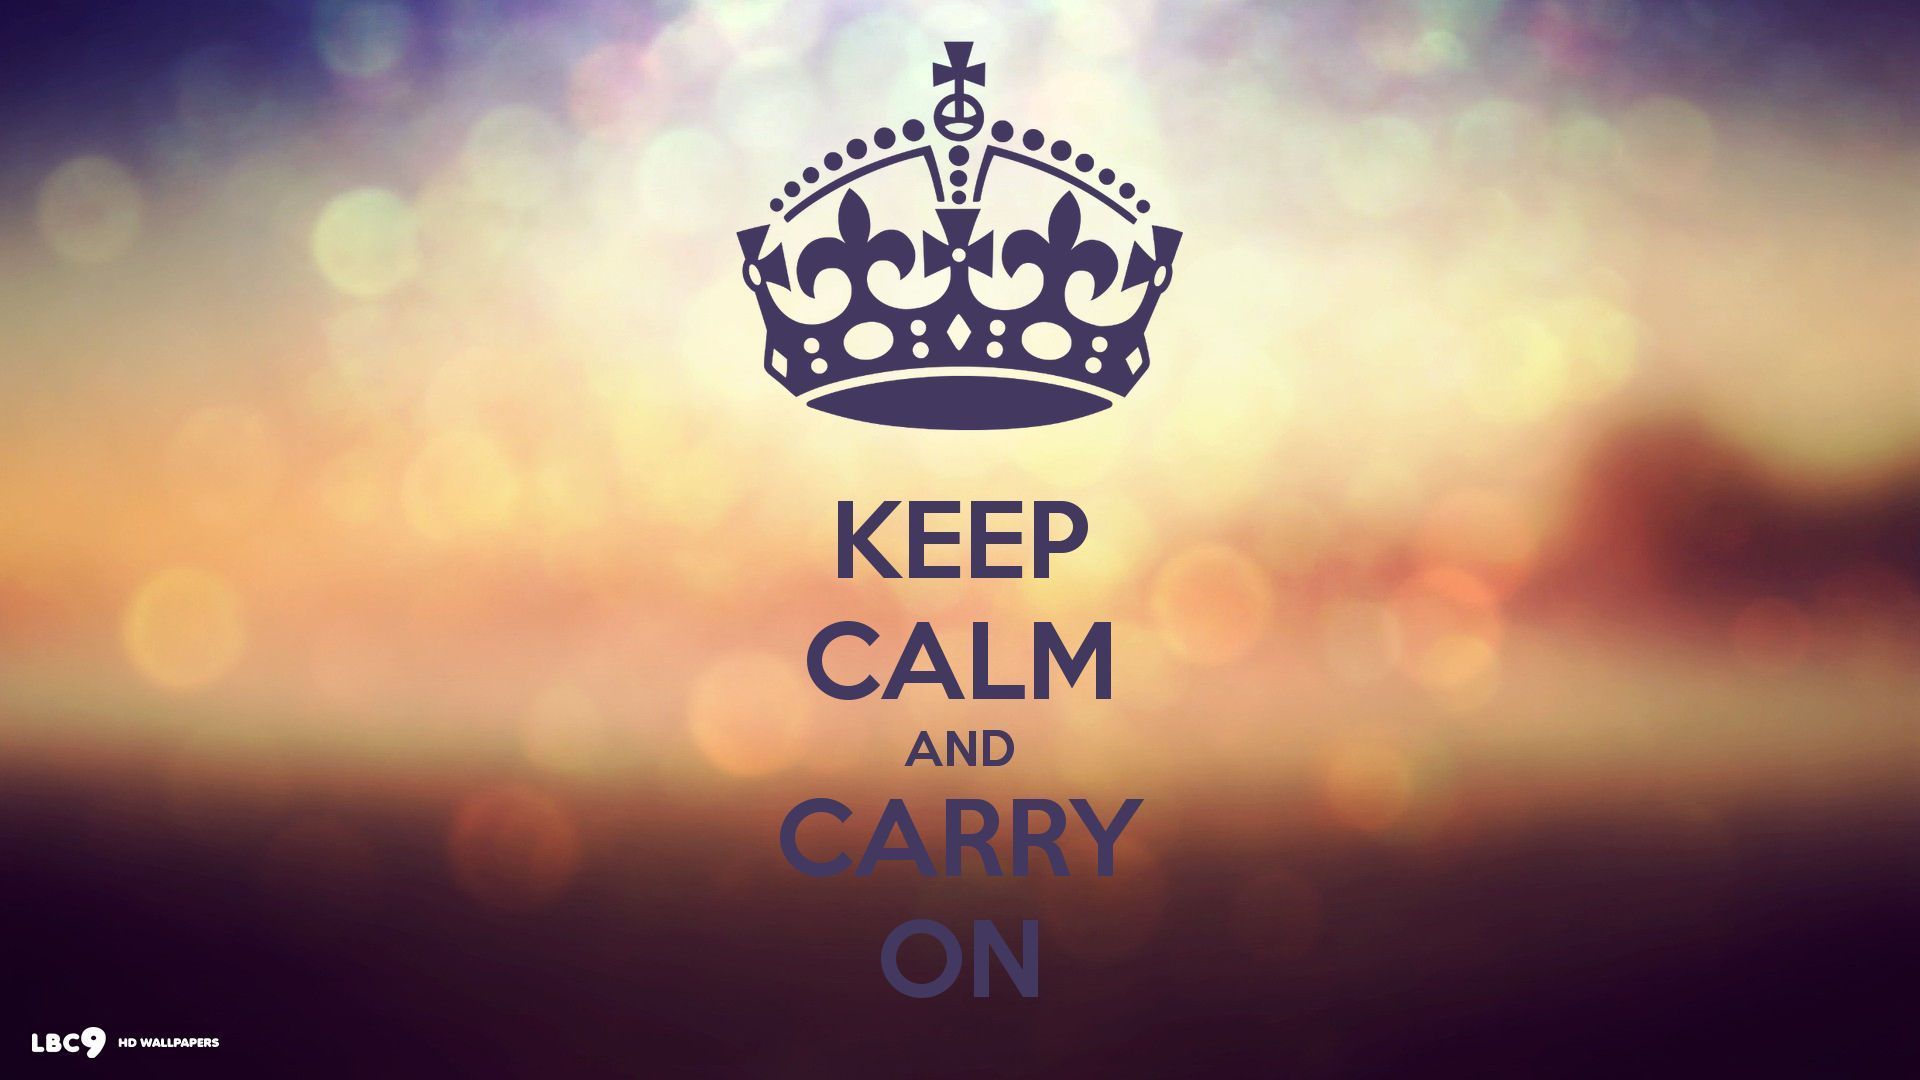 Keep calm and carry on wallpaper 4 / 25 typography hd backgrounds